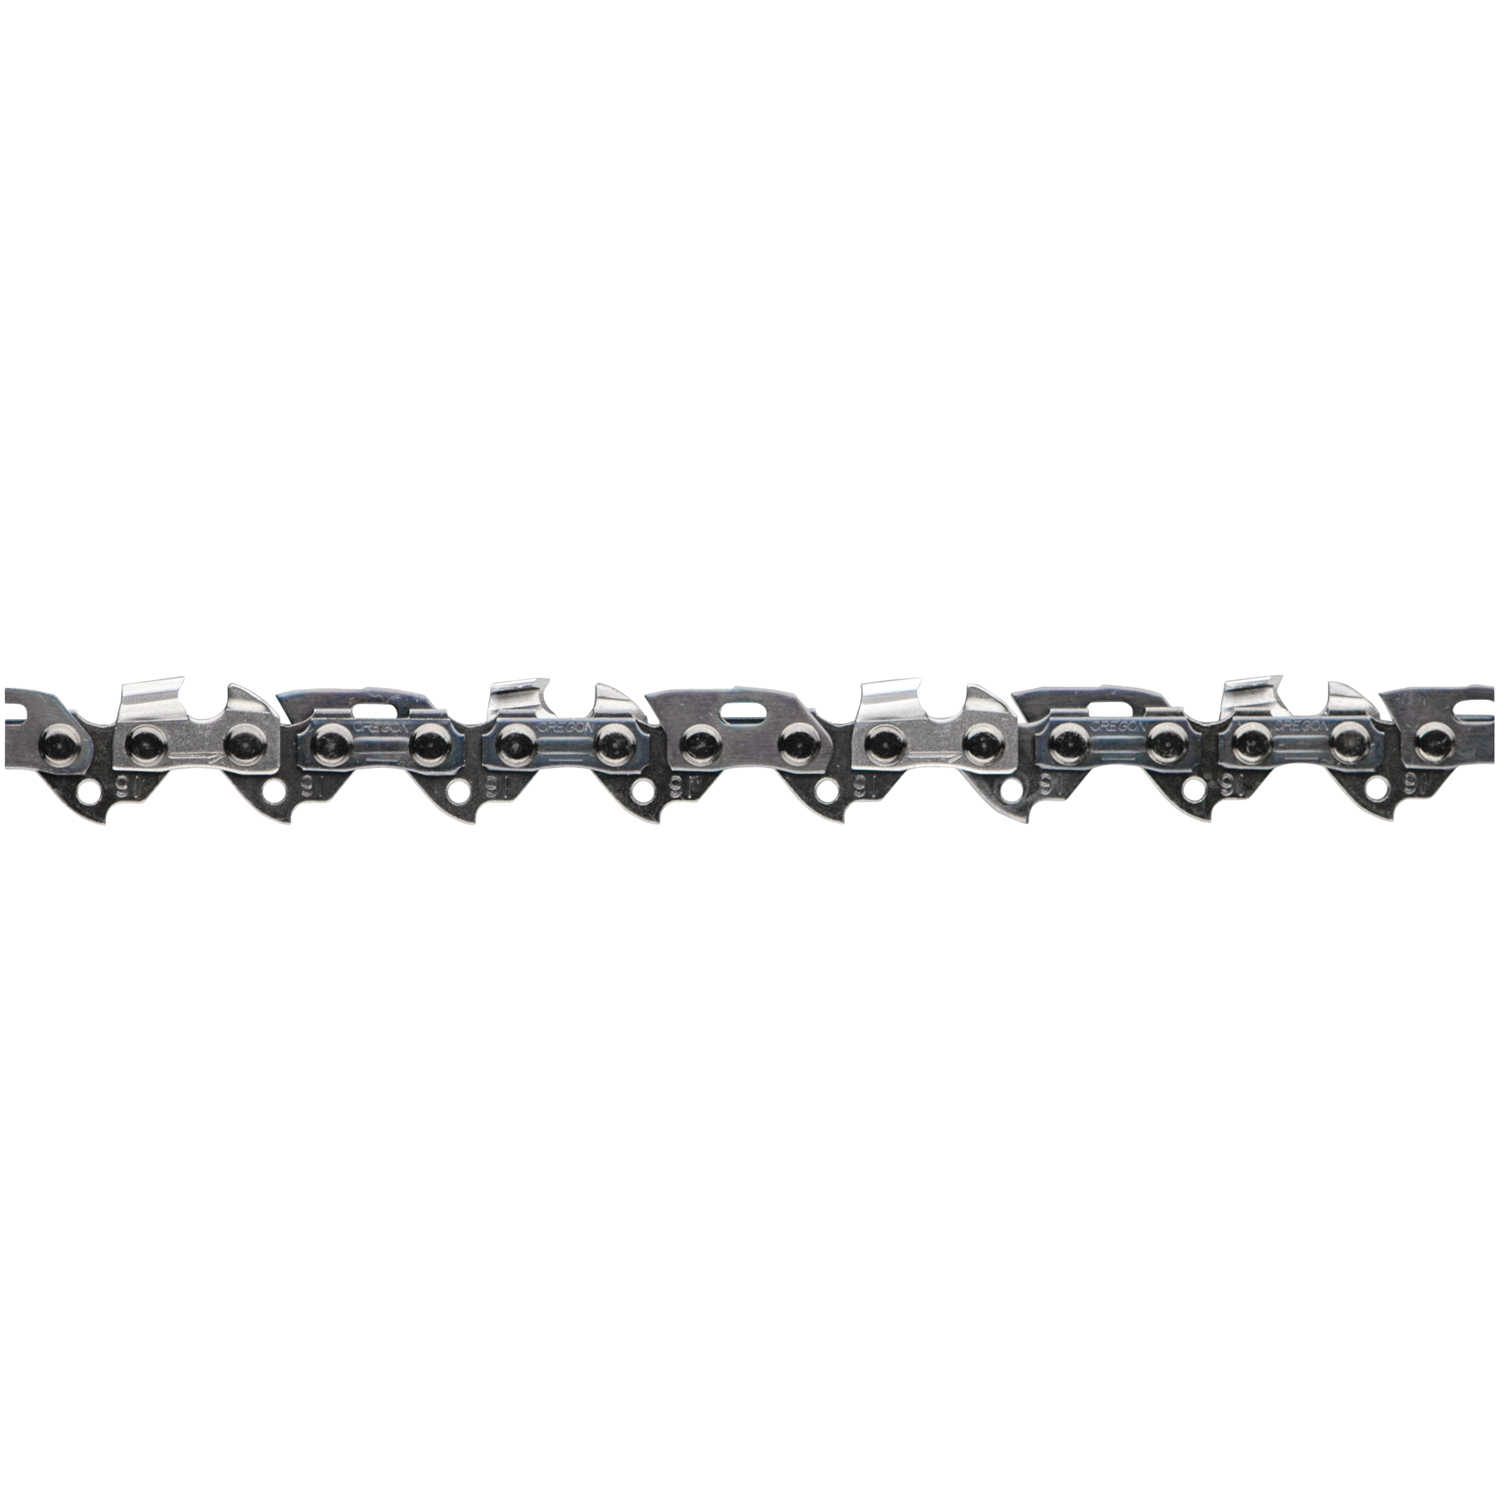 Rotary .050 Gauge 3/8 Pitch 52 Link Low Pro Chainsaw Chain With Bumper Link Repl 